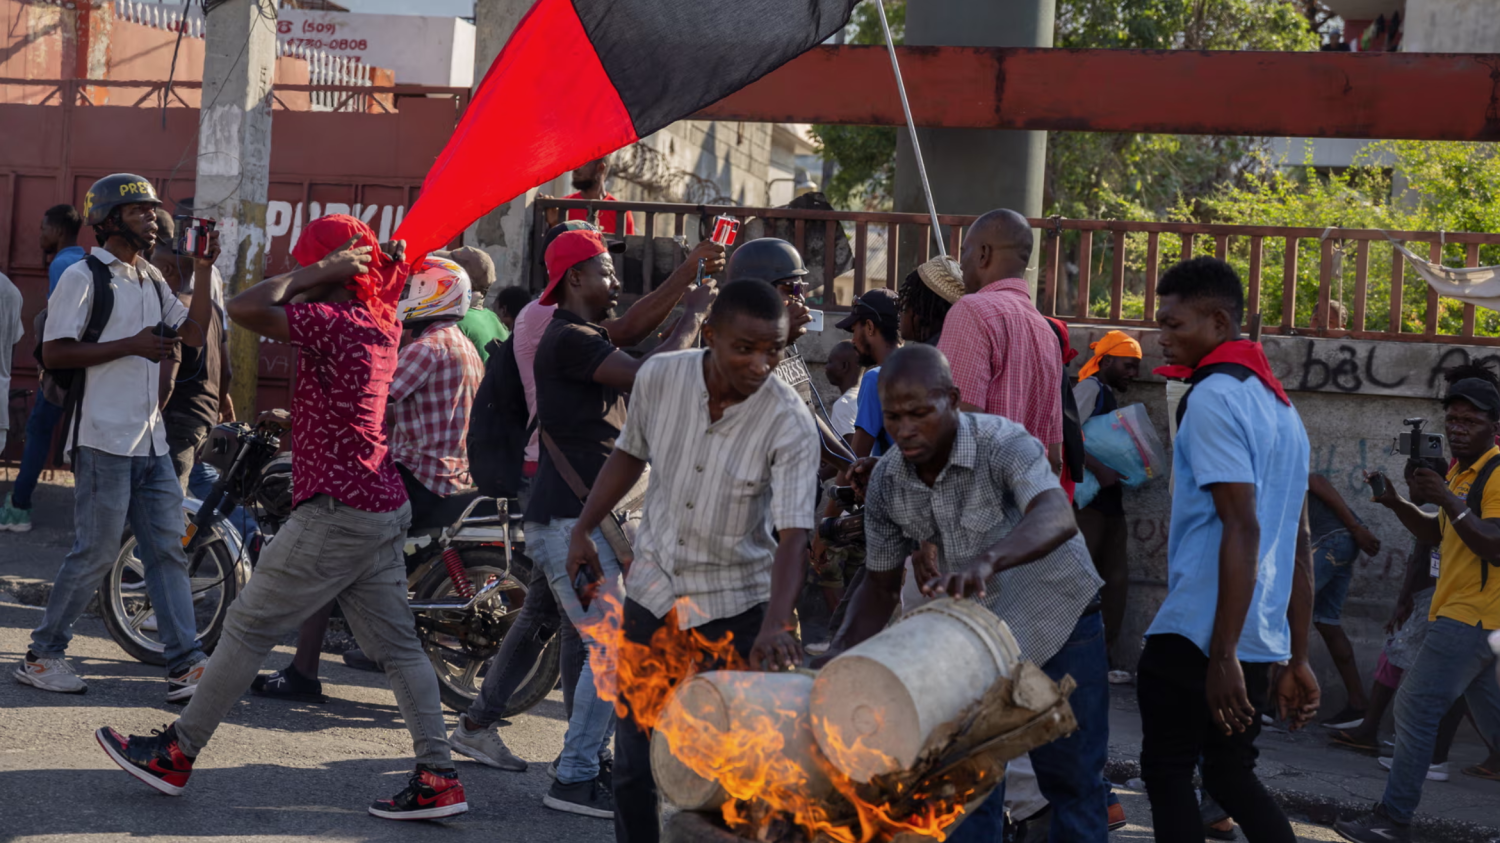 People set tyres on fire during a demonstration demanding the resignation of the Haitian prime minister, Ariel Henry, in Port-au-Prince on 7 March. Photograph: Anadolu/Getty Images